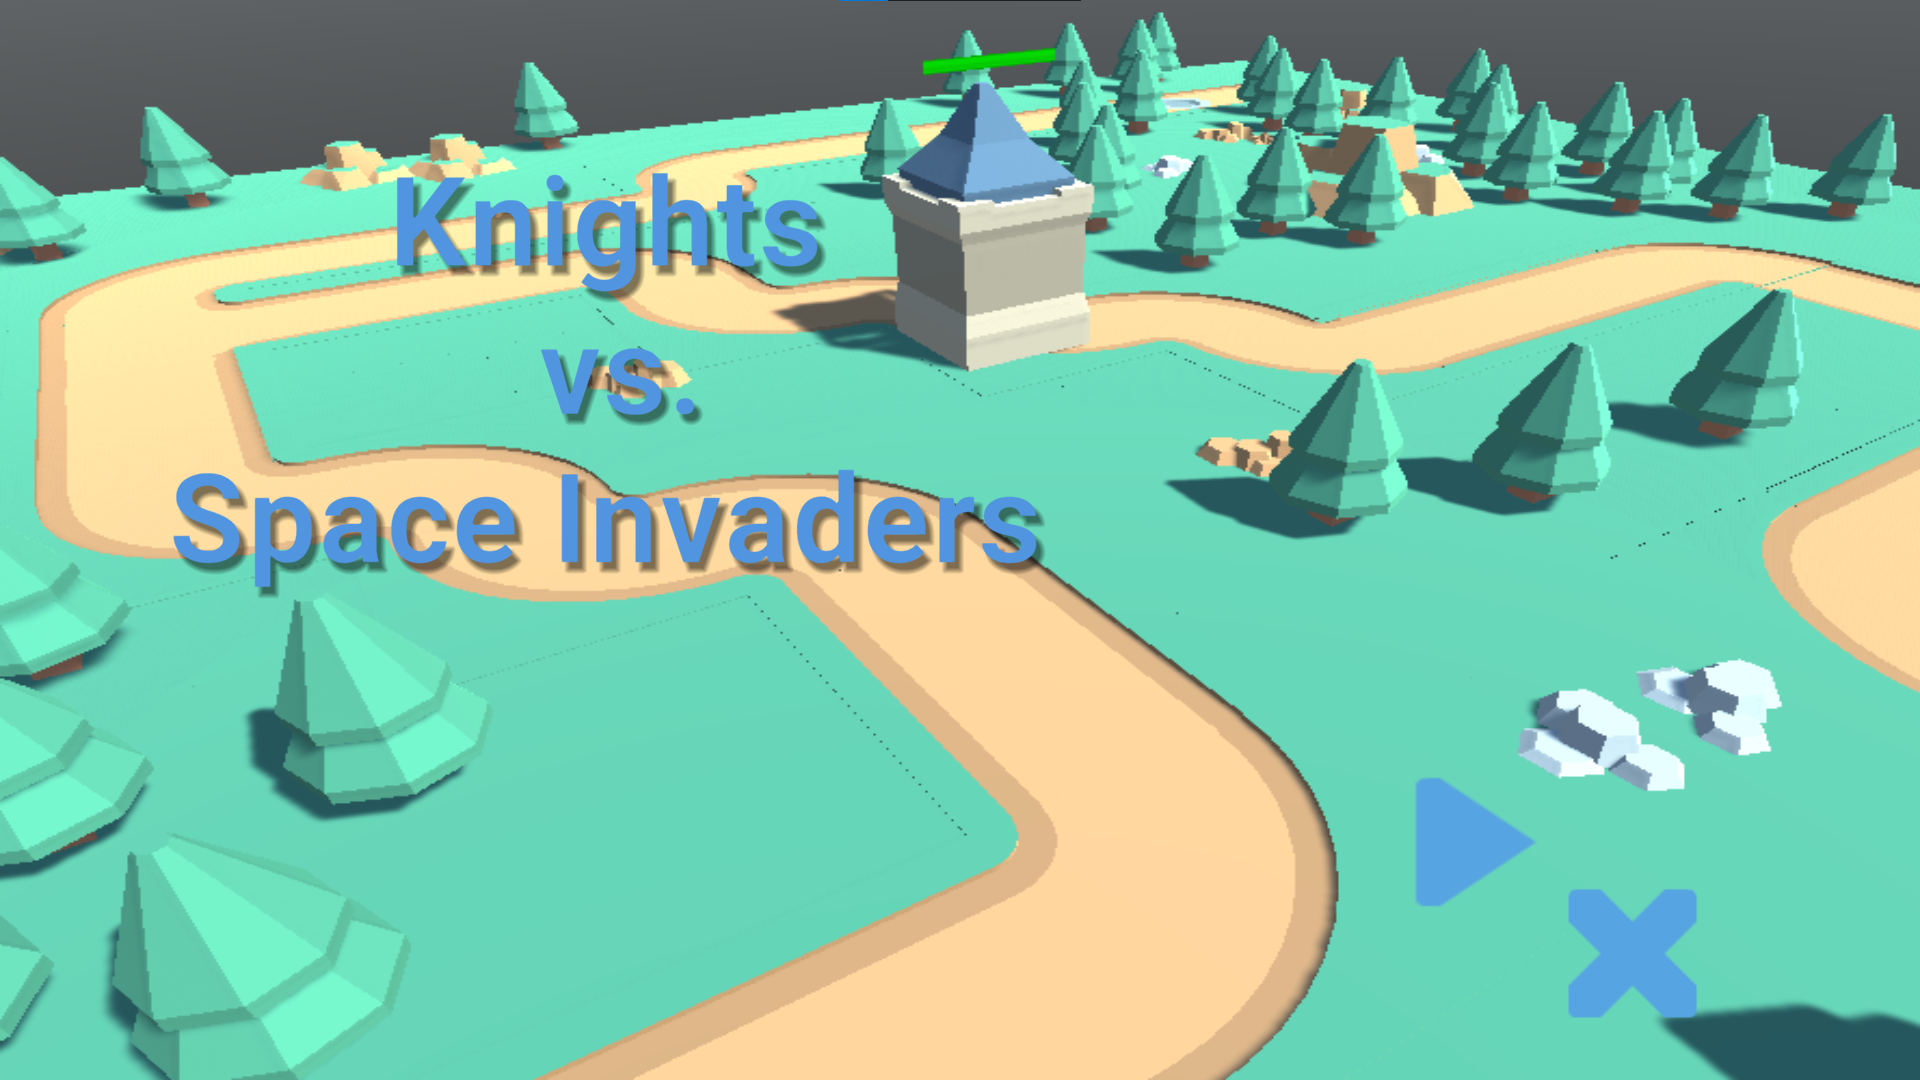 Knights vs. Space Invaders